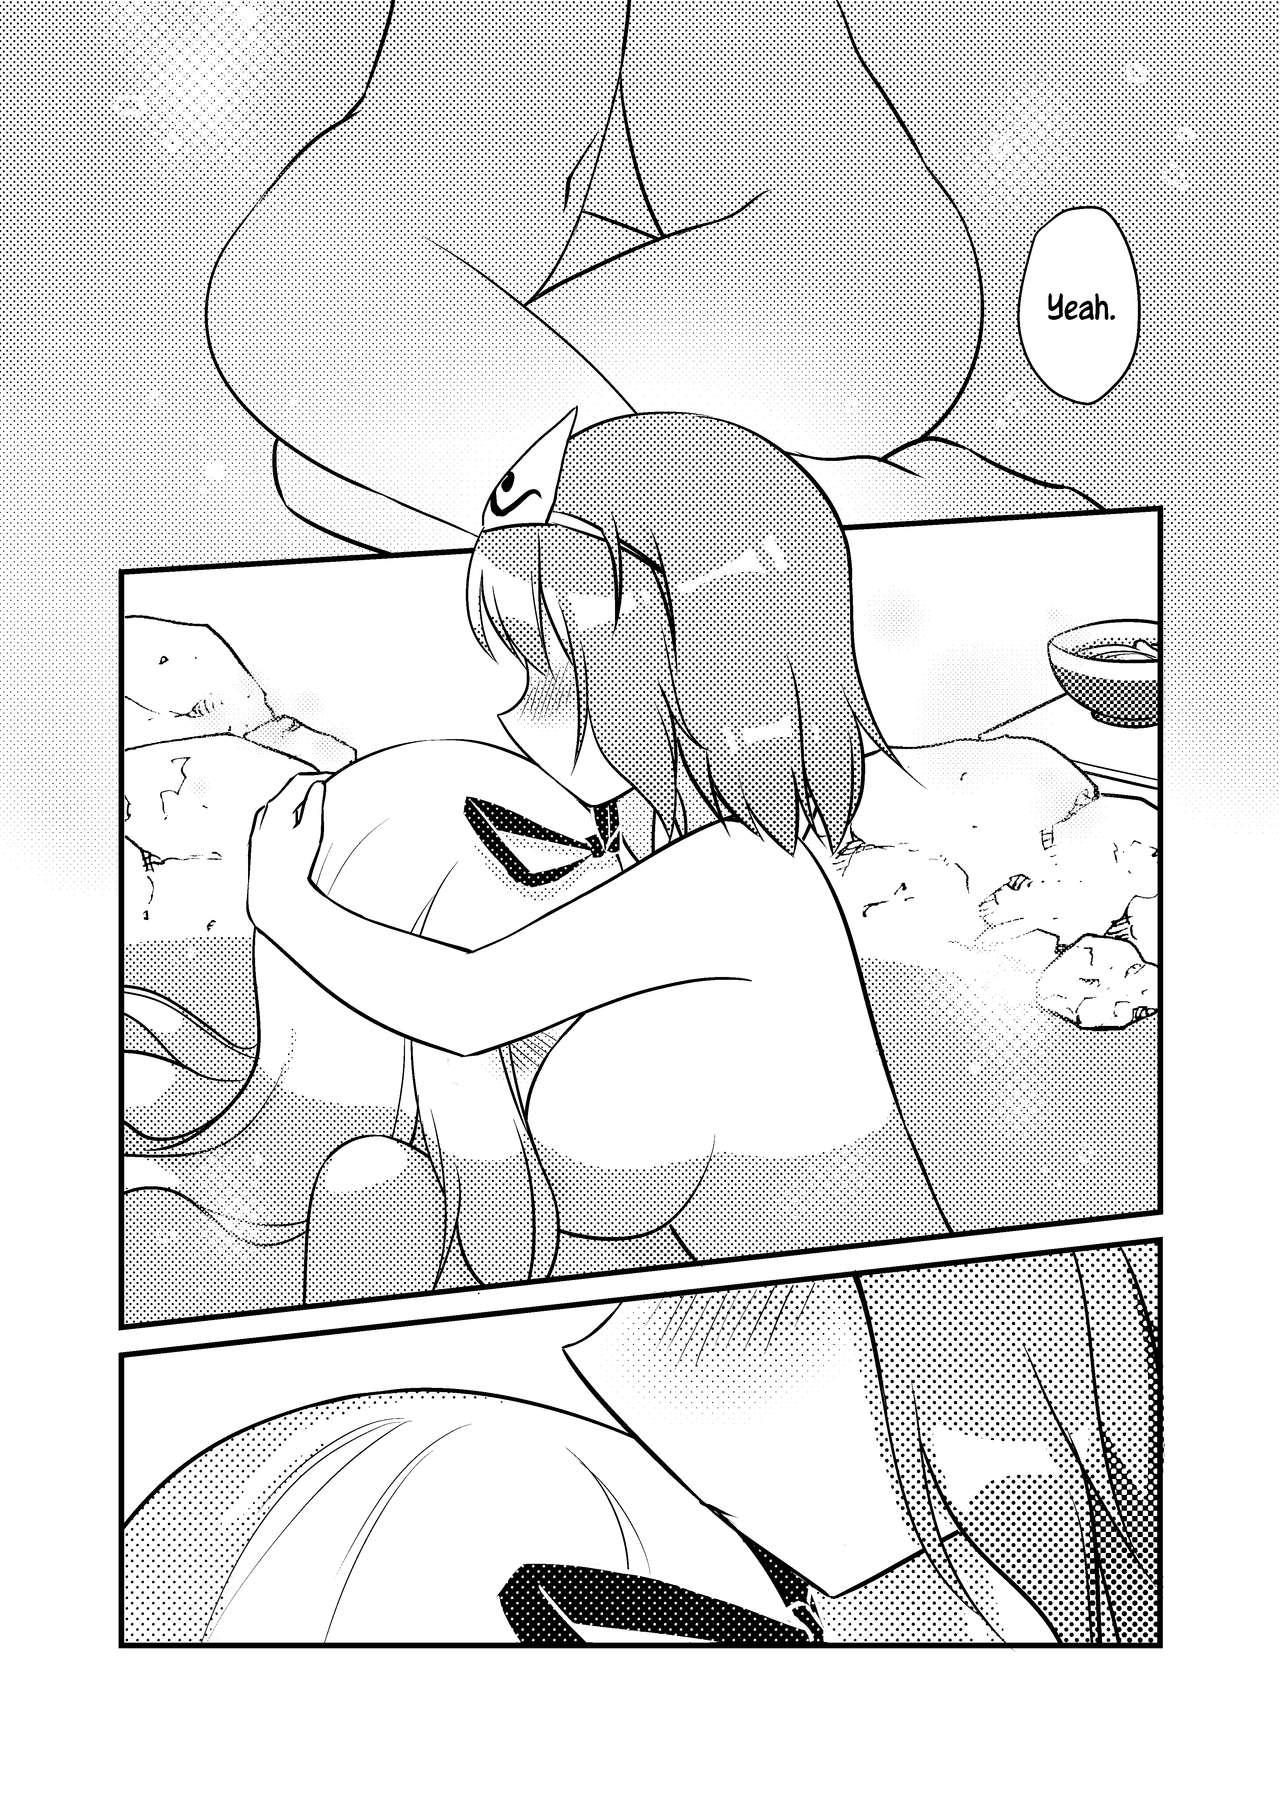 Oiled ????一起泡温泉吧！ | ????Let's Soak in the Hot Spring! - Touhou project Putaria - Page 10